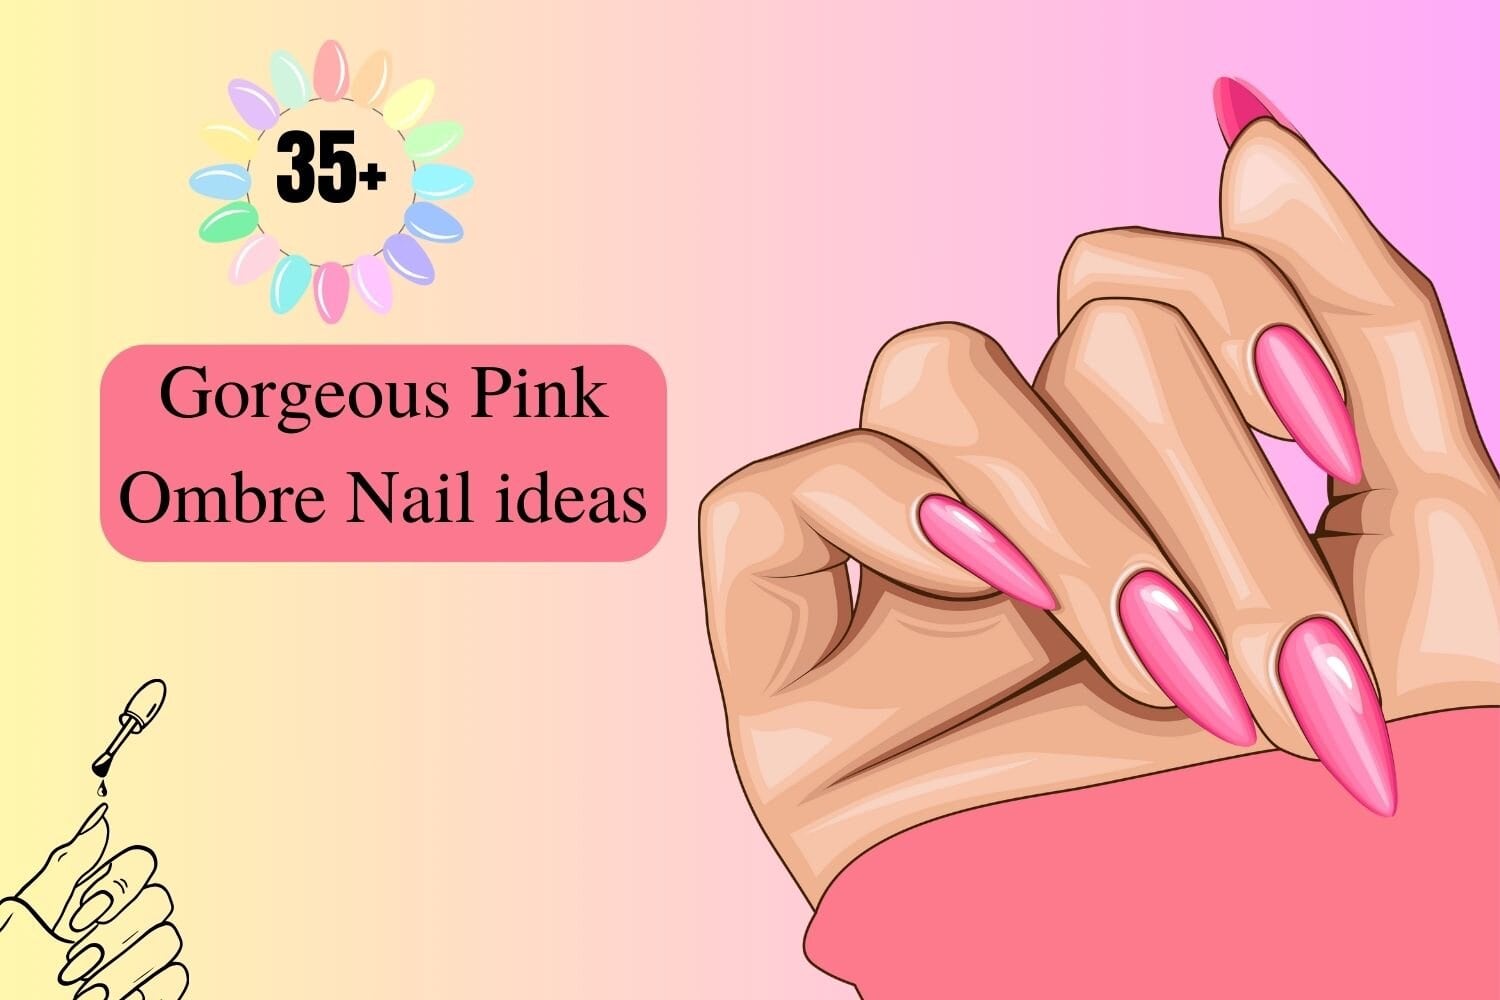 35 Gorgeous Pink Ombre Nail Ideas for Your Next Manicure